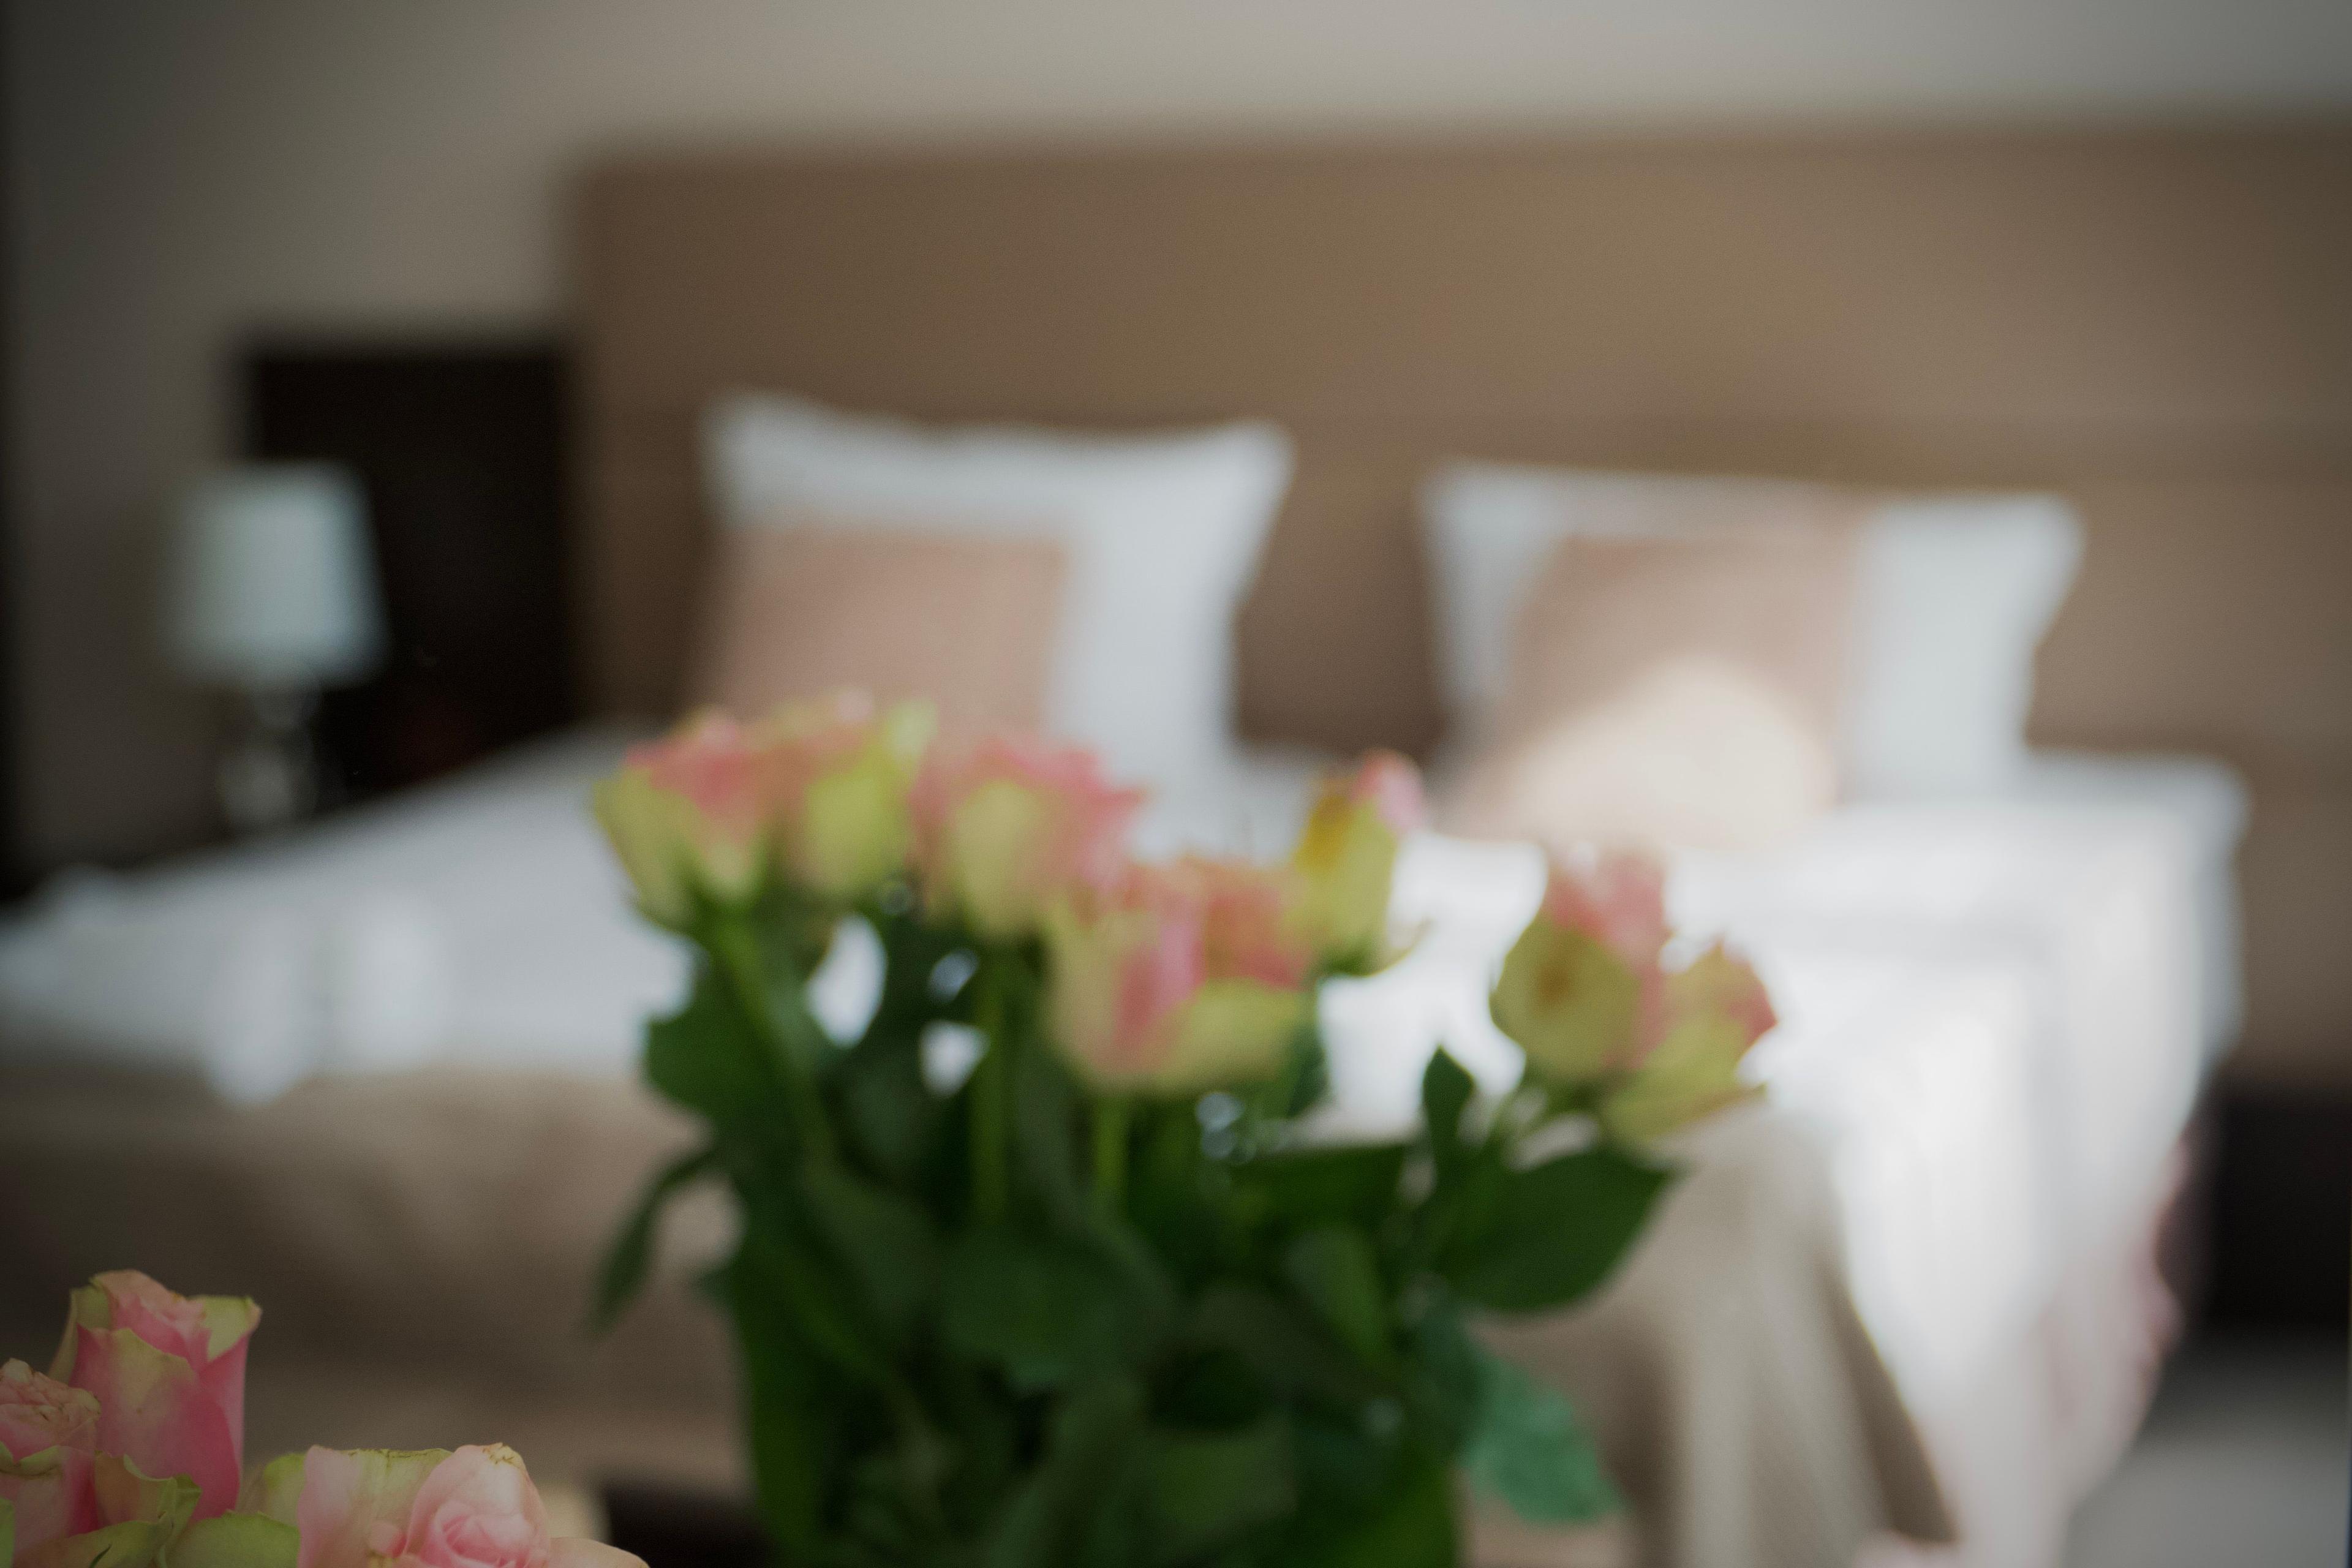 Roses with a bed in the background